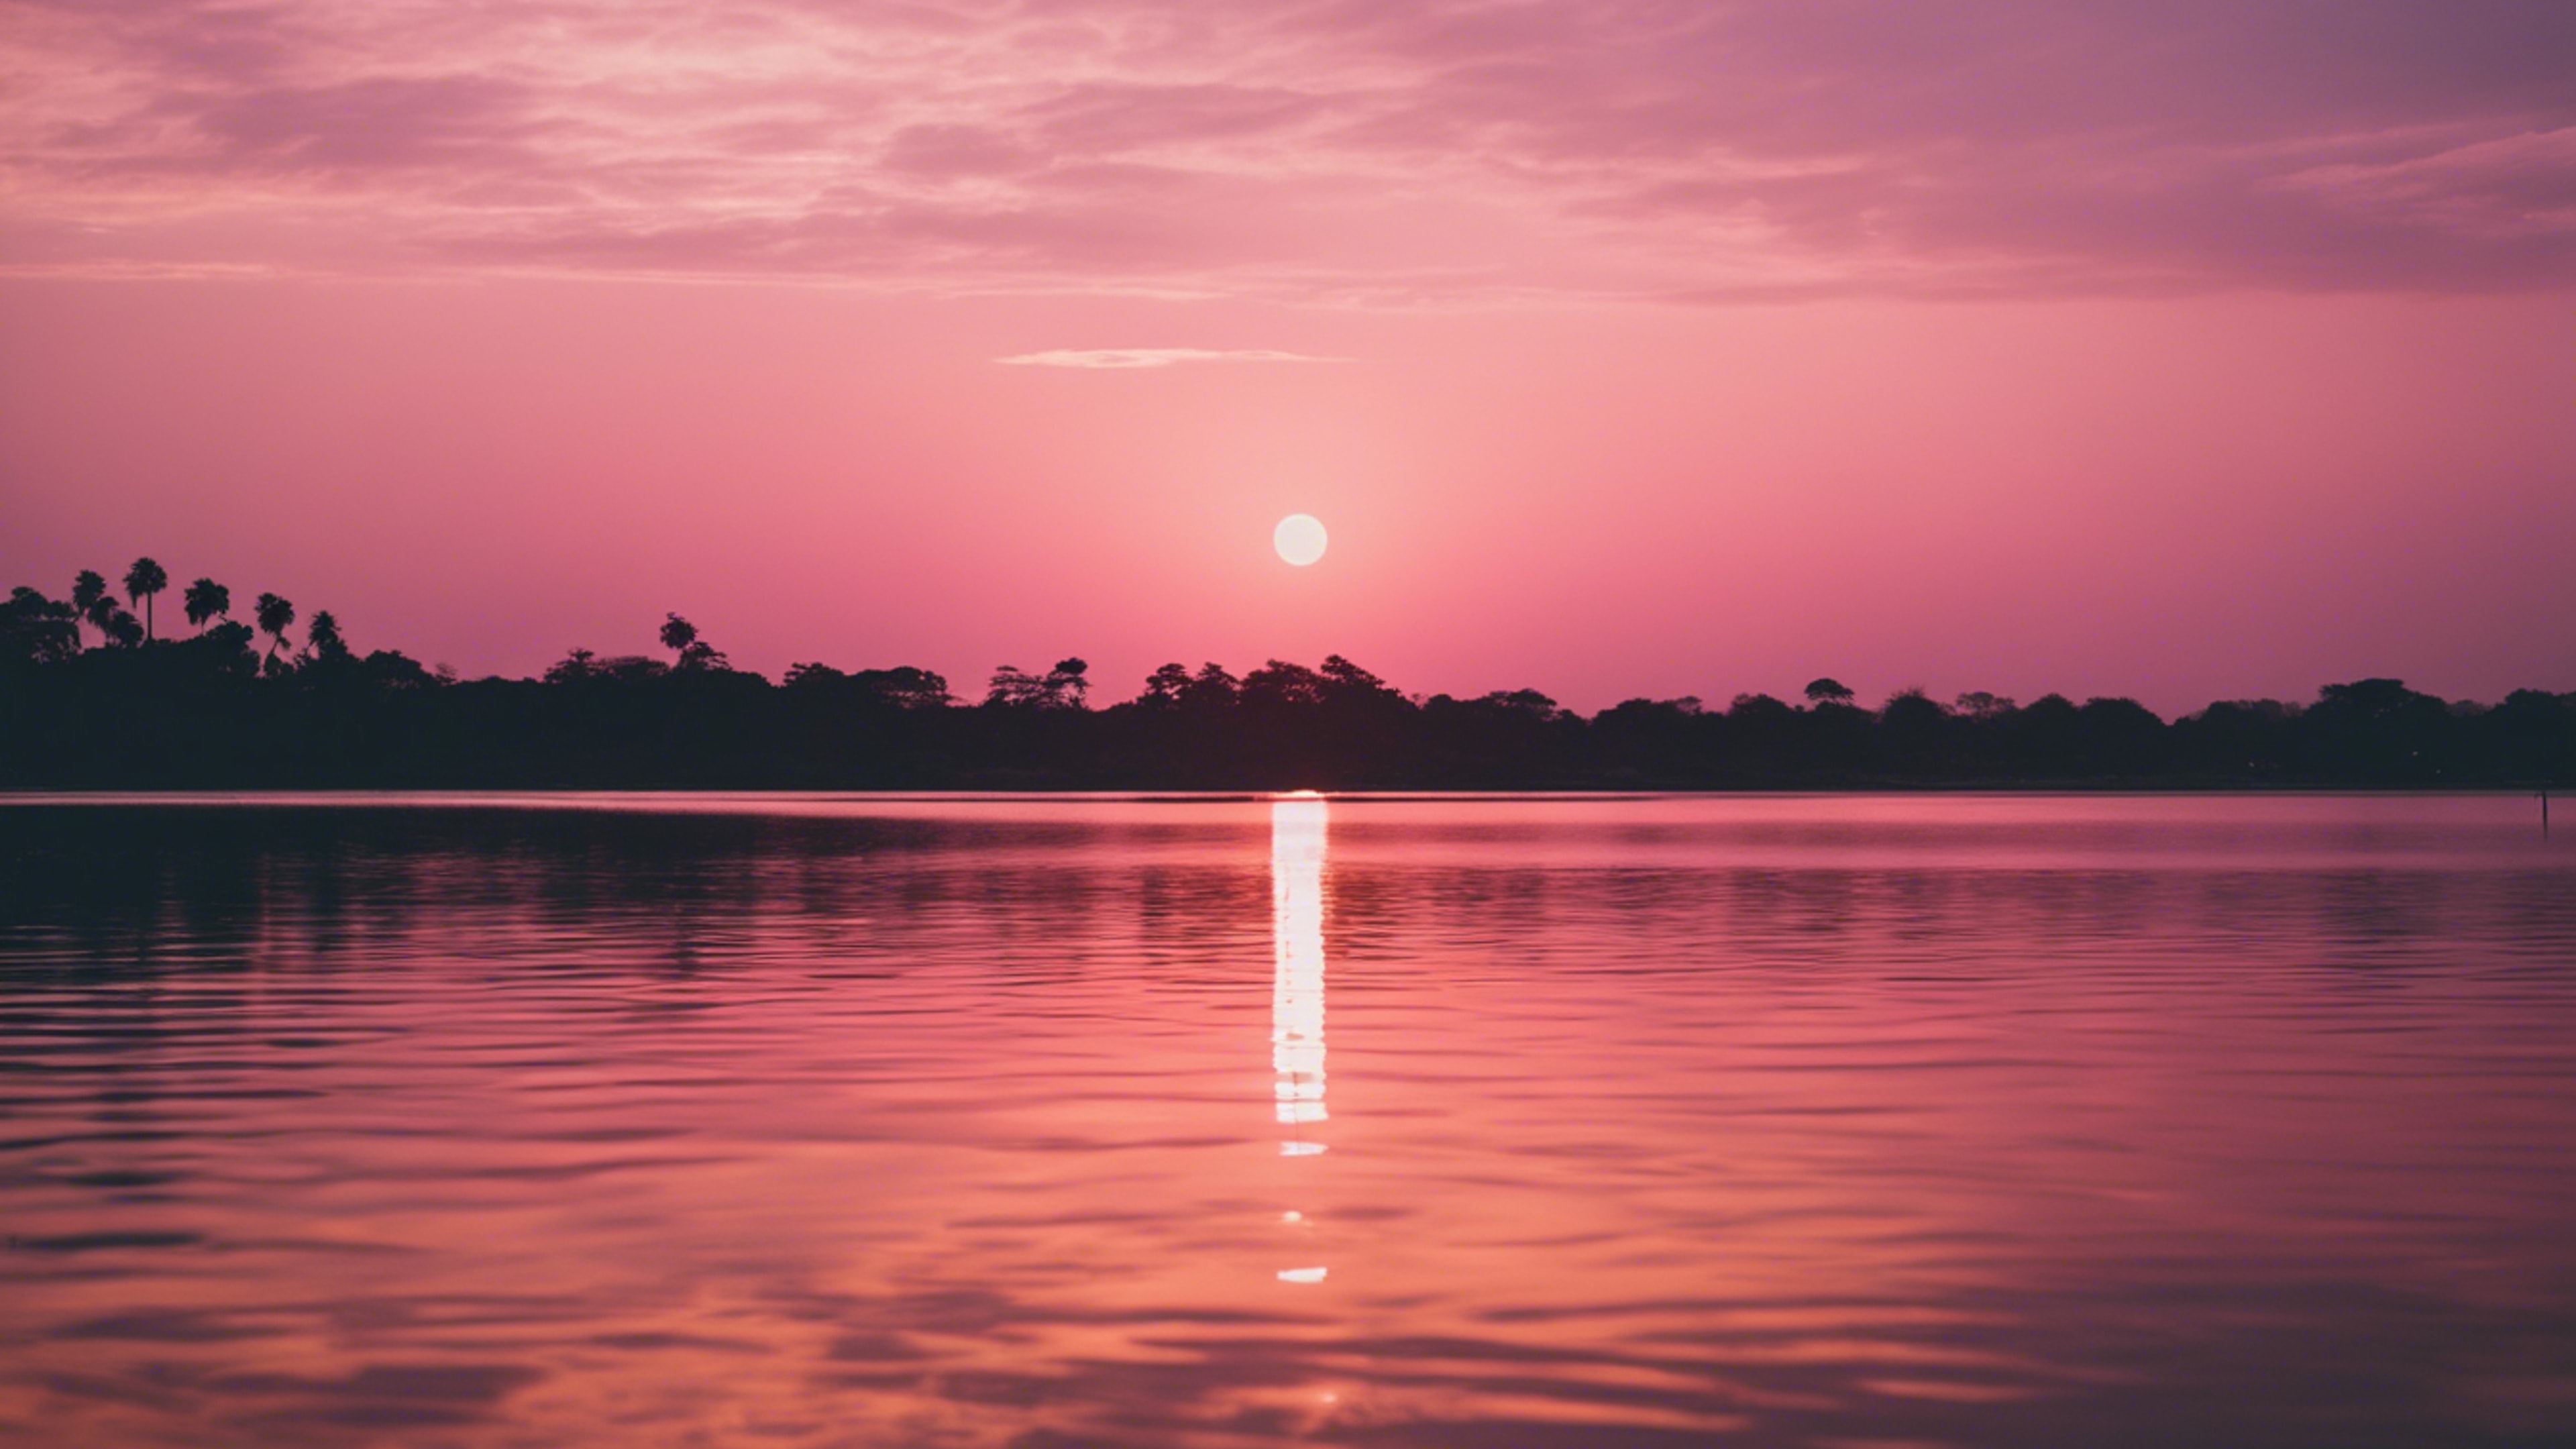 A picturesque pink and gold sunset reflecting on tranquil lagoon waters. Шпалери[938883e46b5847a4931b]